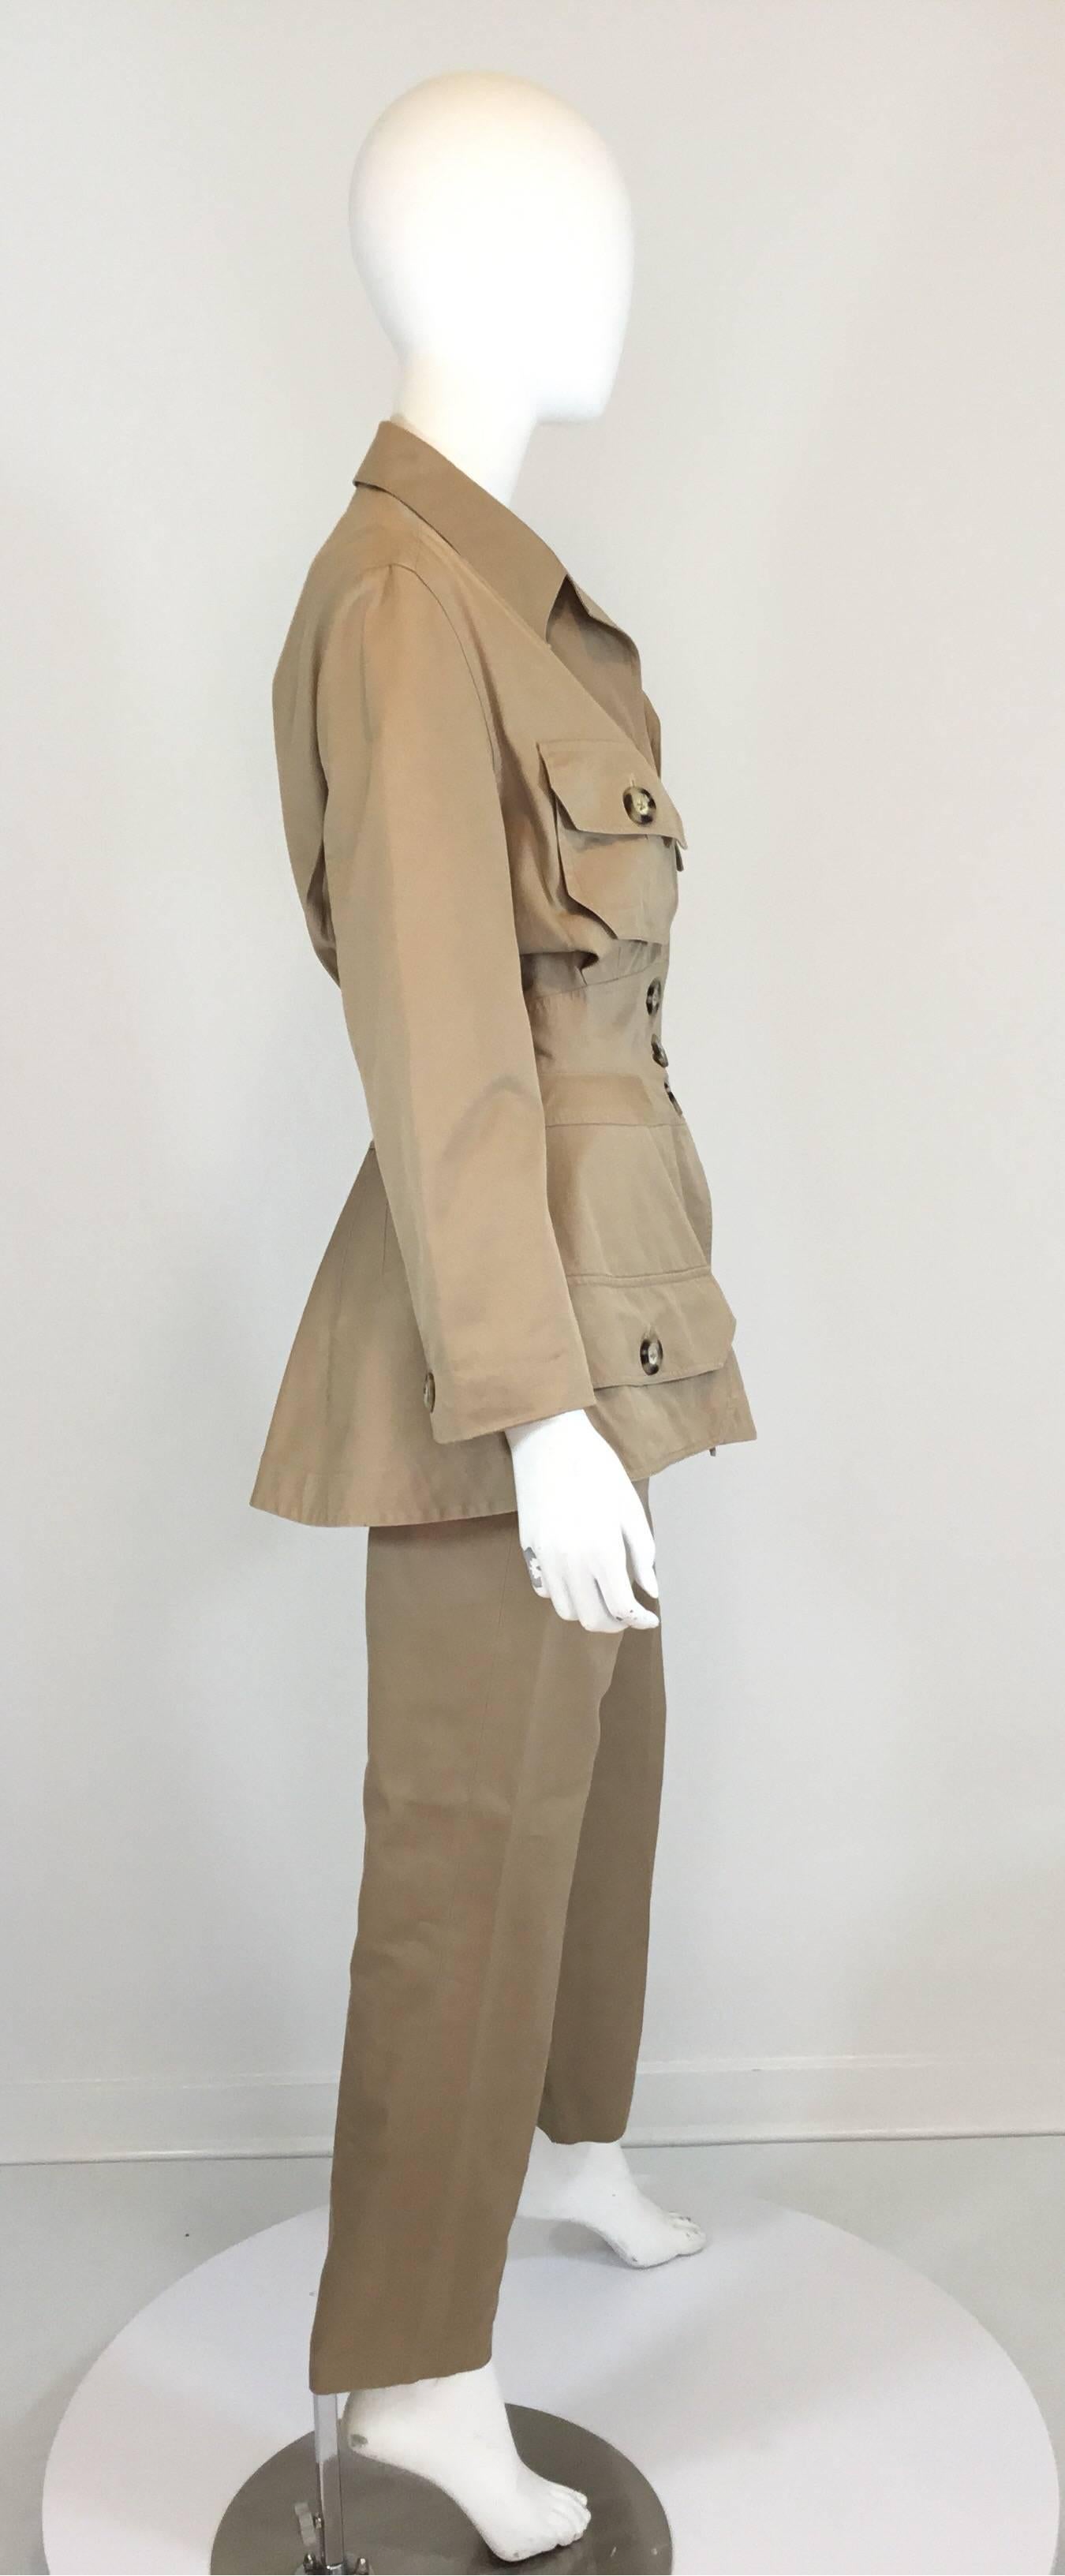 Byron Lars pant and jacket set has button closures at the front of the jacket with tortoise-like button closures and 4 patch pockets. Exagerated design with nipped waist and large buttons.  Pants have a back zipper fastening and are fully lined.